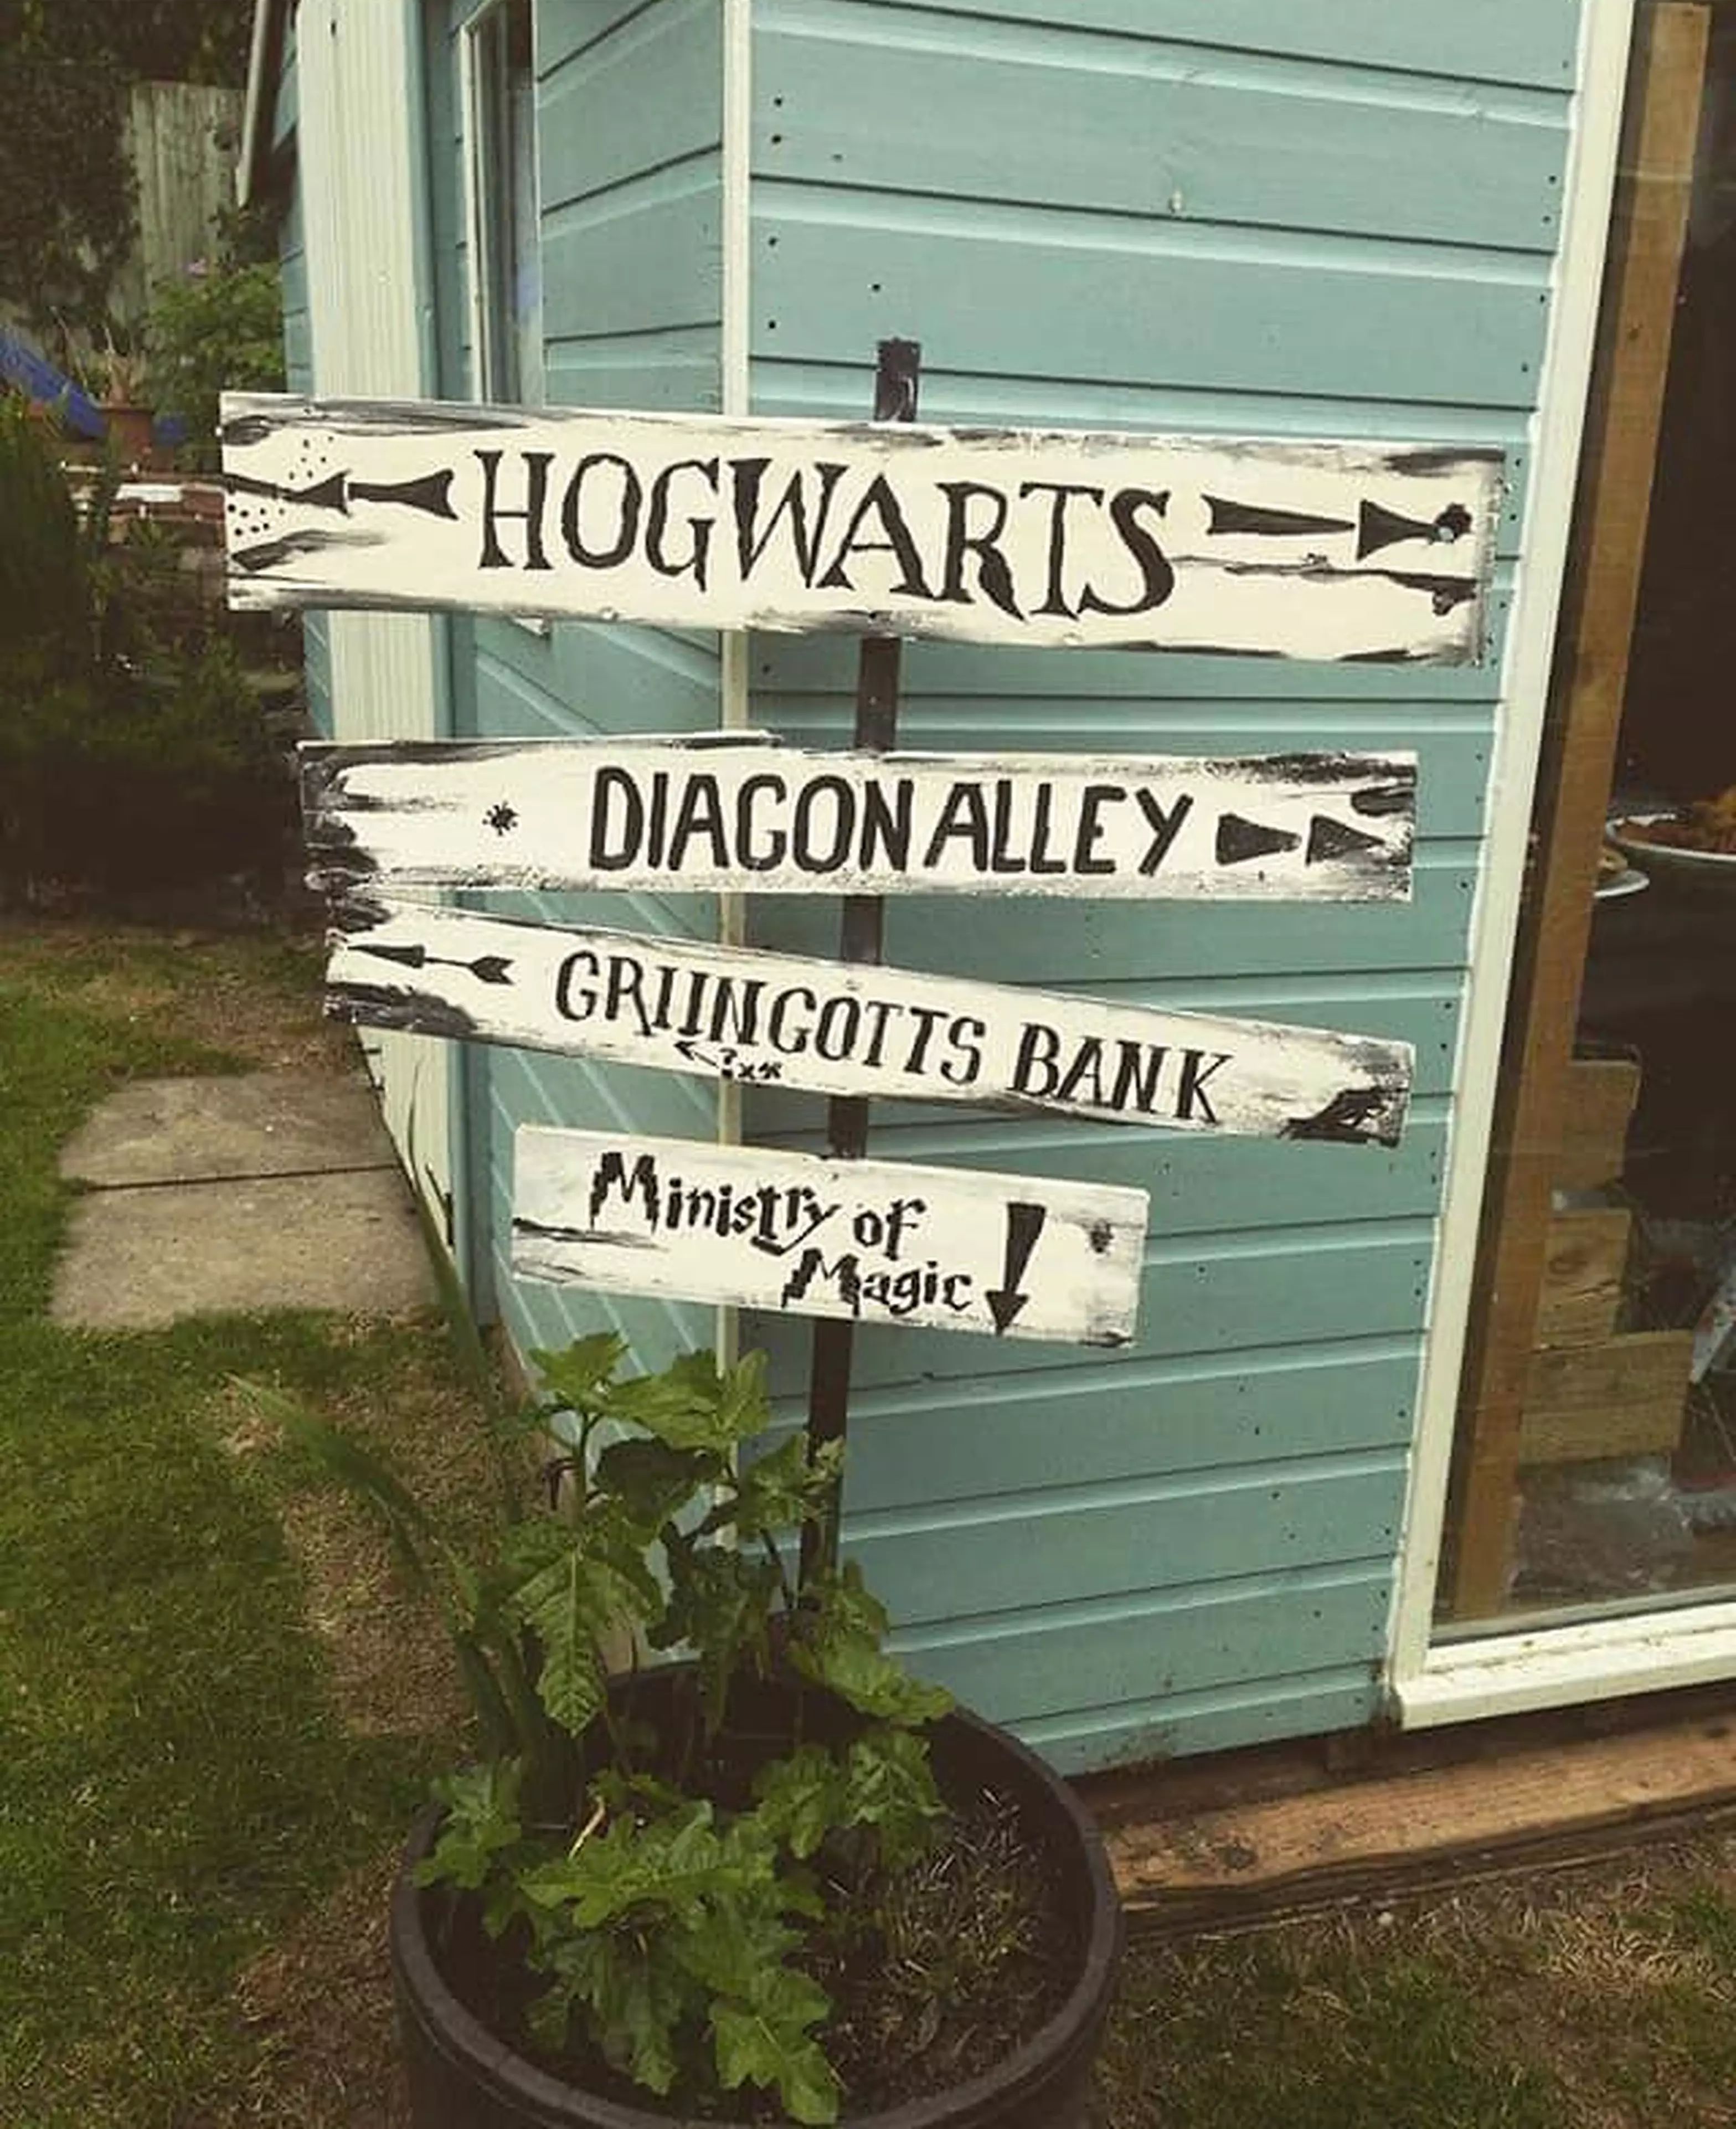 Hannah even installed a sign in her garden (